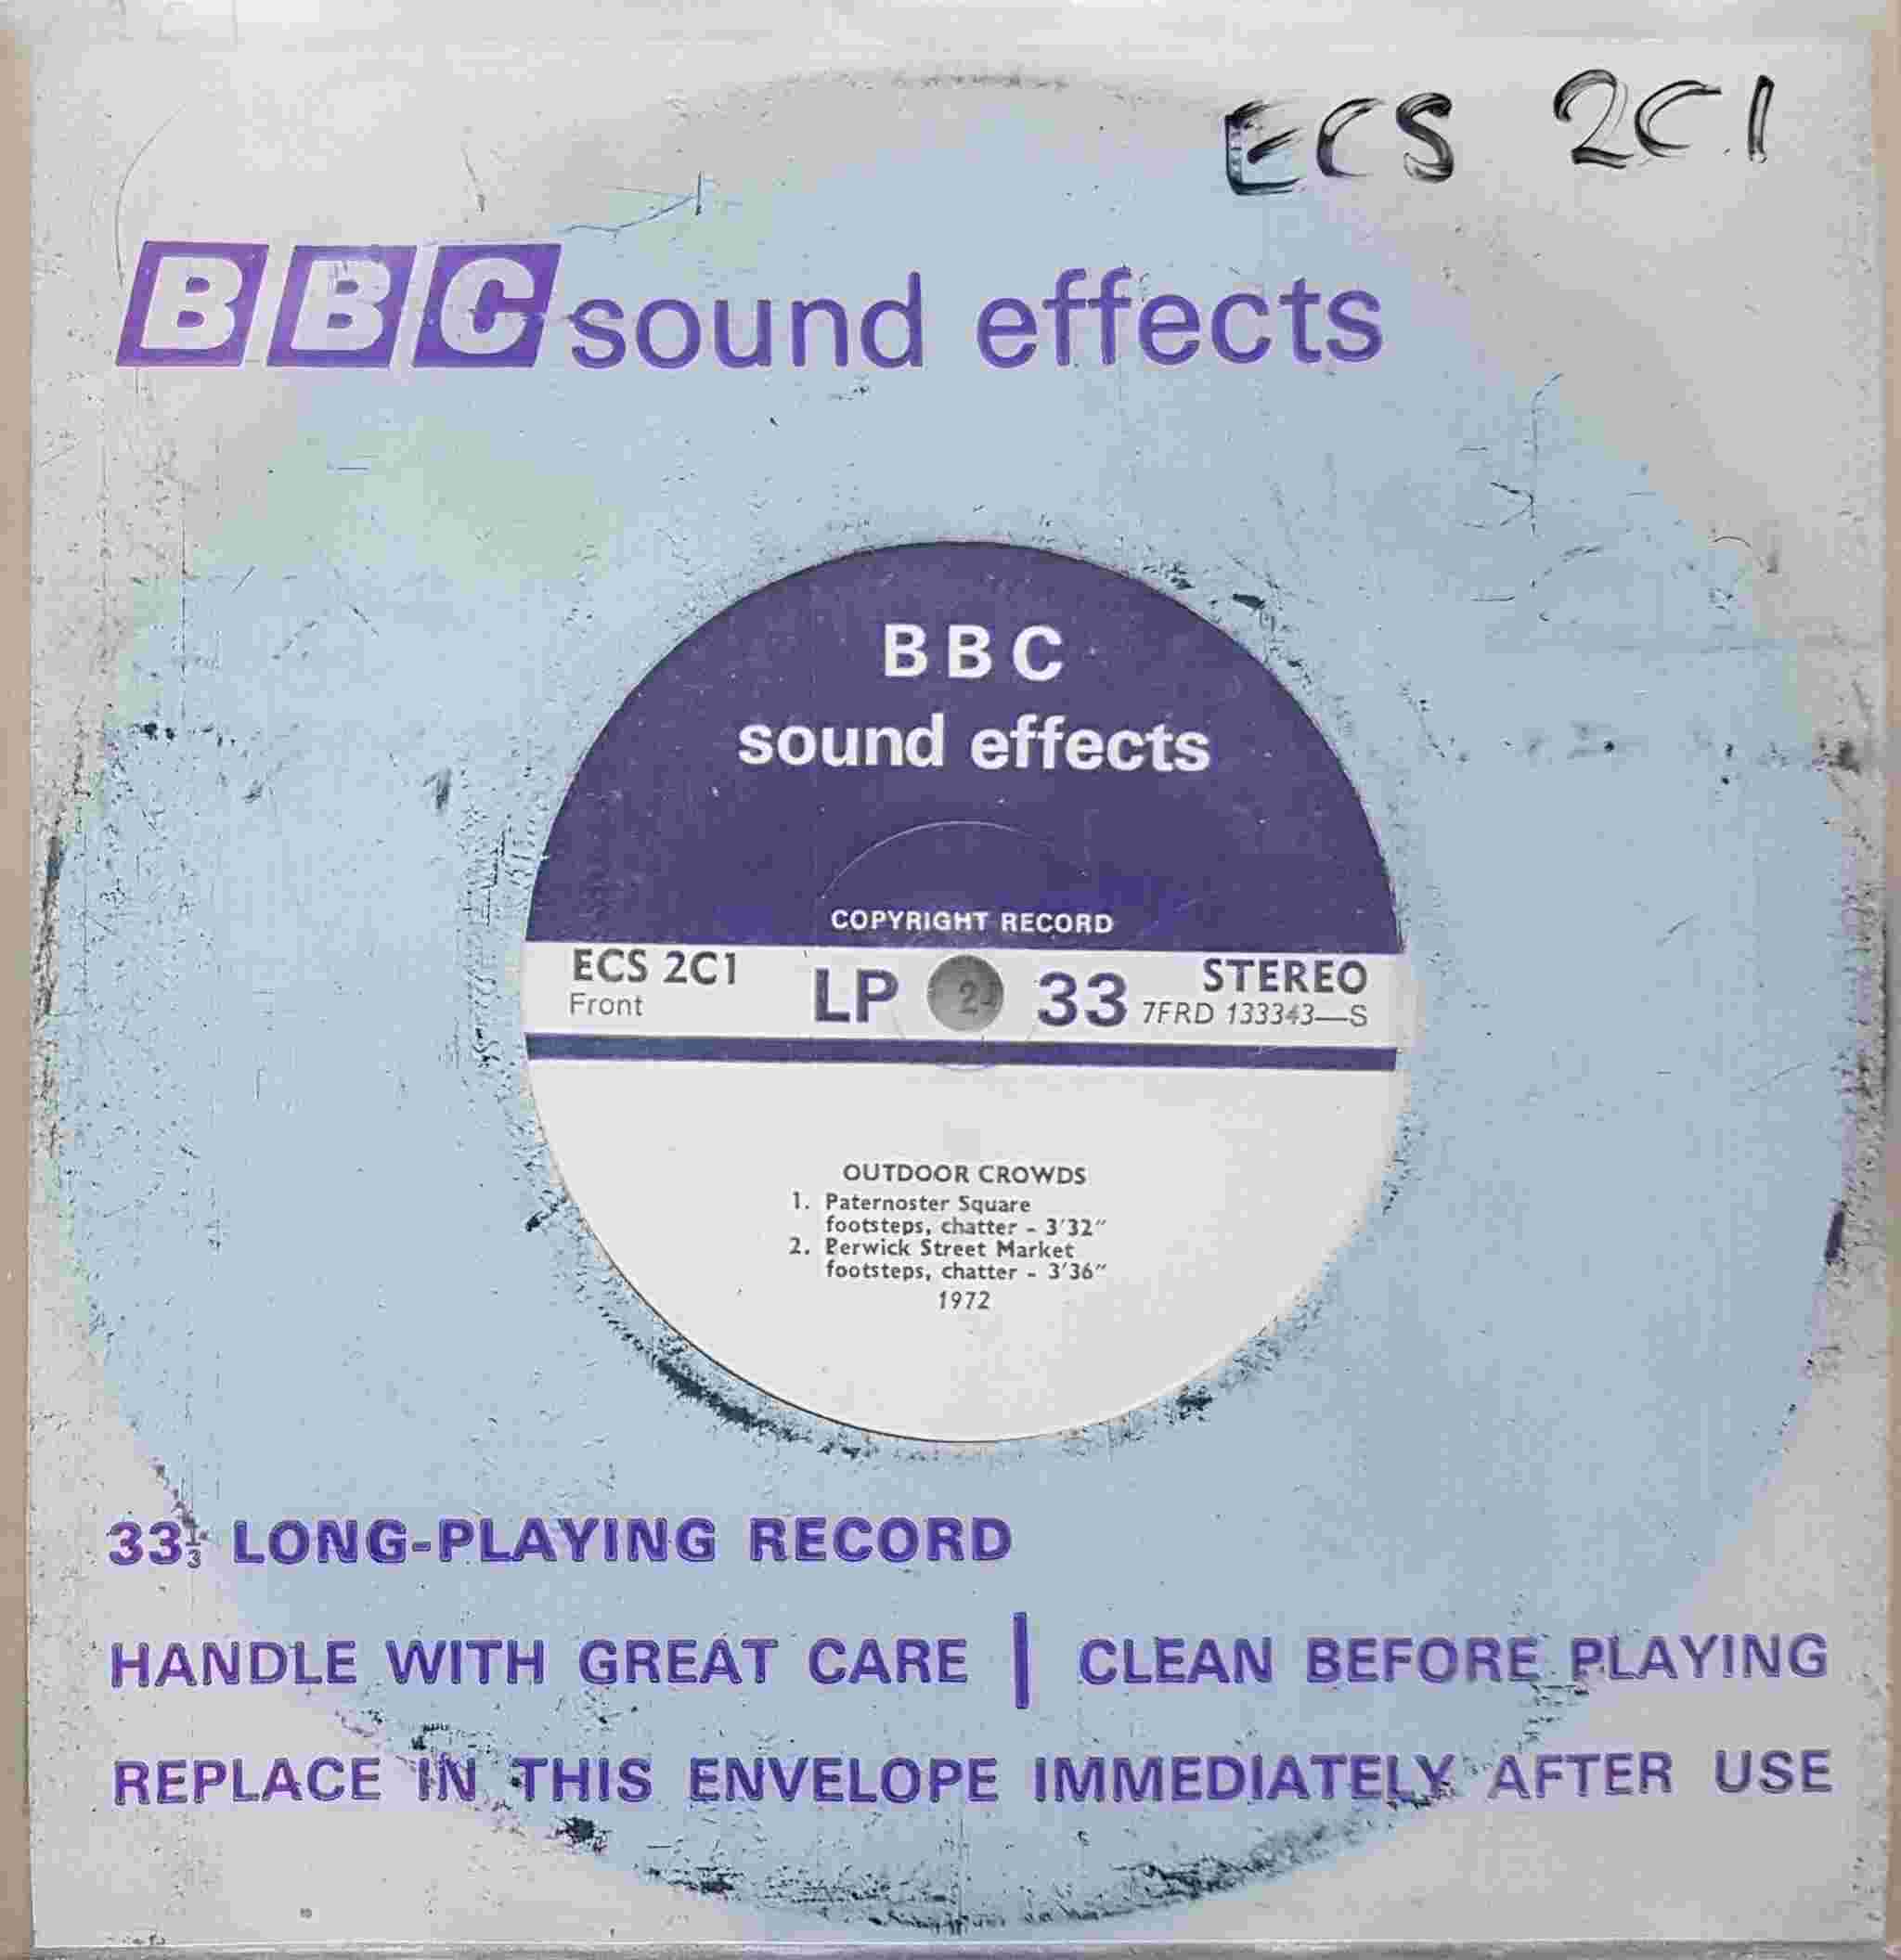 Picture of ECS 2C1 Outdoor crowds by artist Not registered from the BBC singles - Records and Tapes library